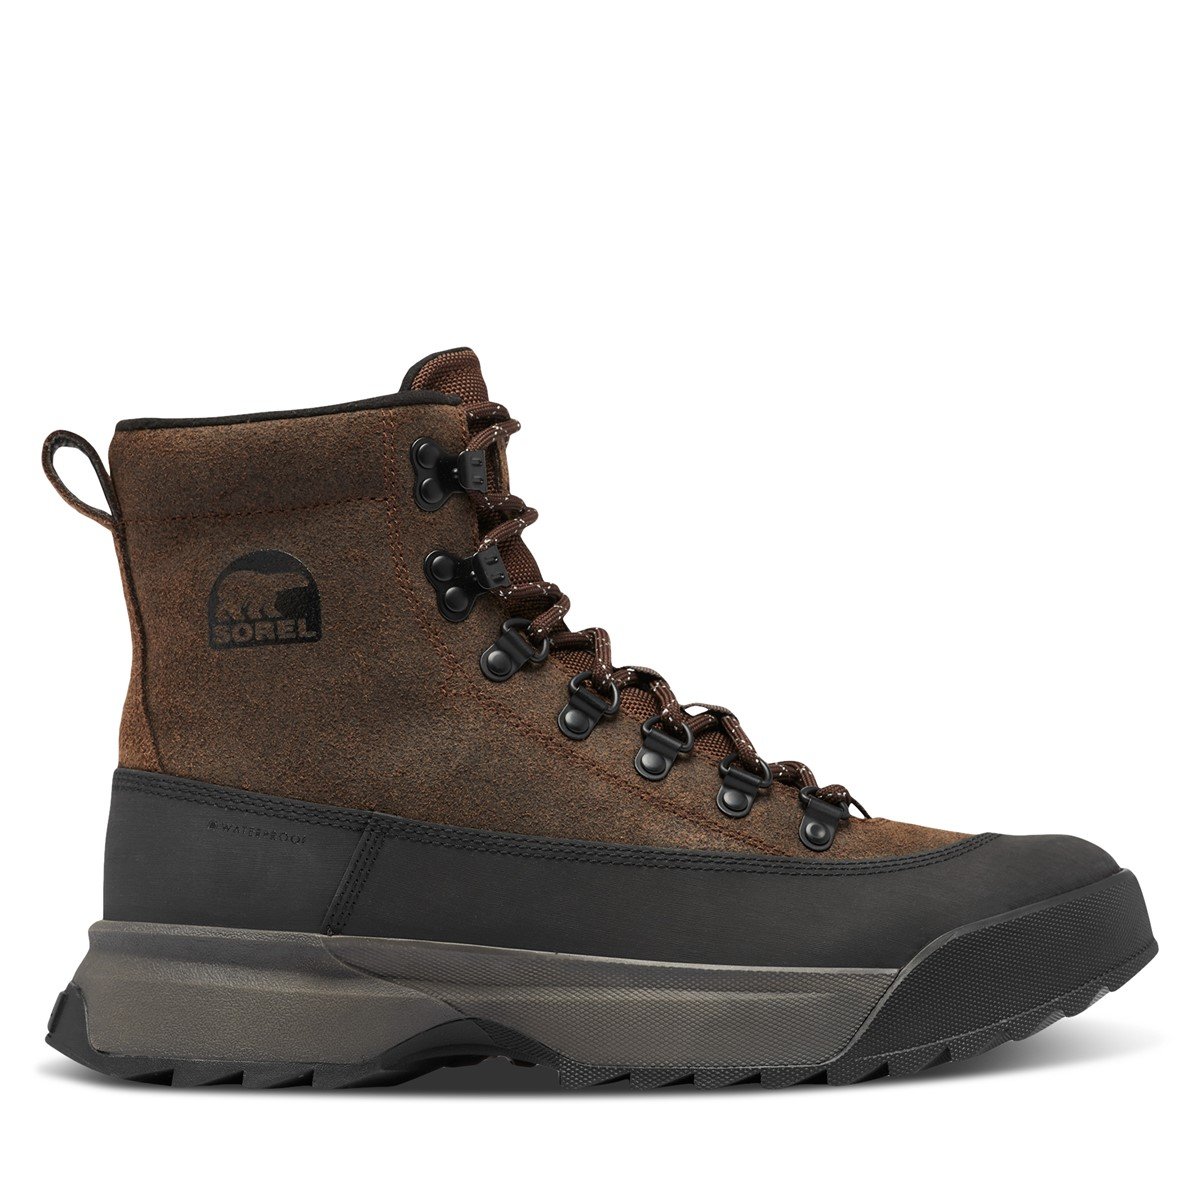 Men's Scout 87 Pro Winter Boots in Brown/Black